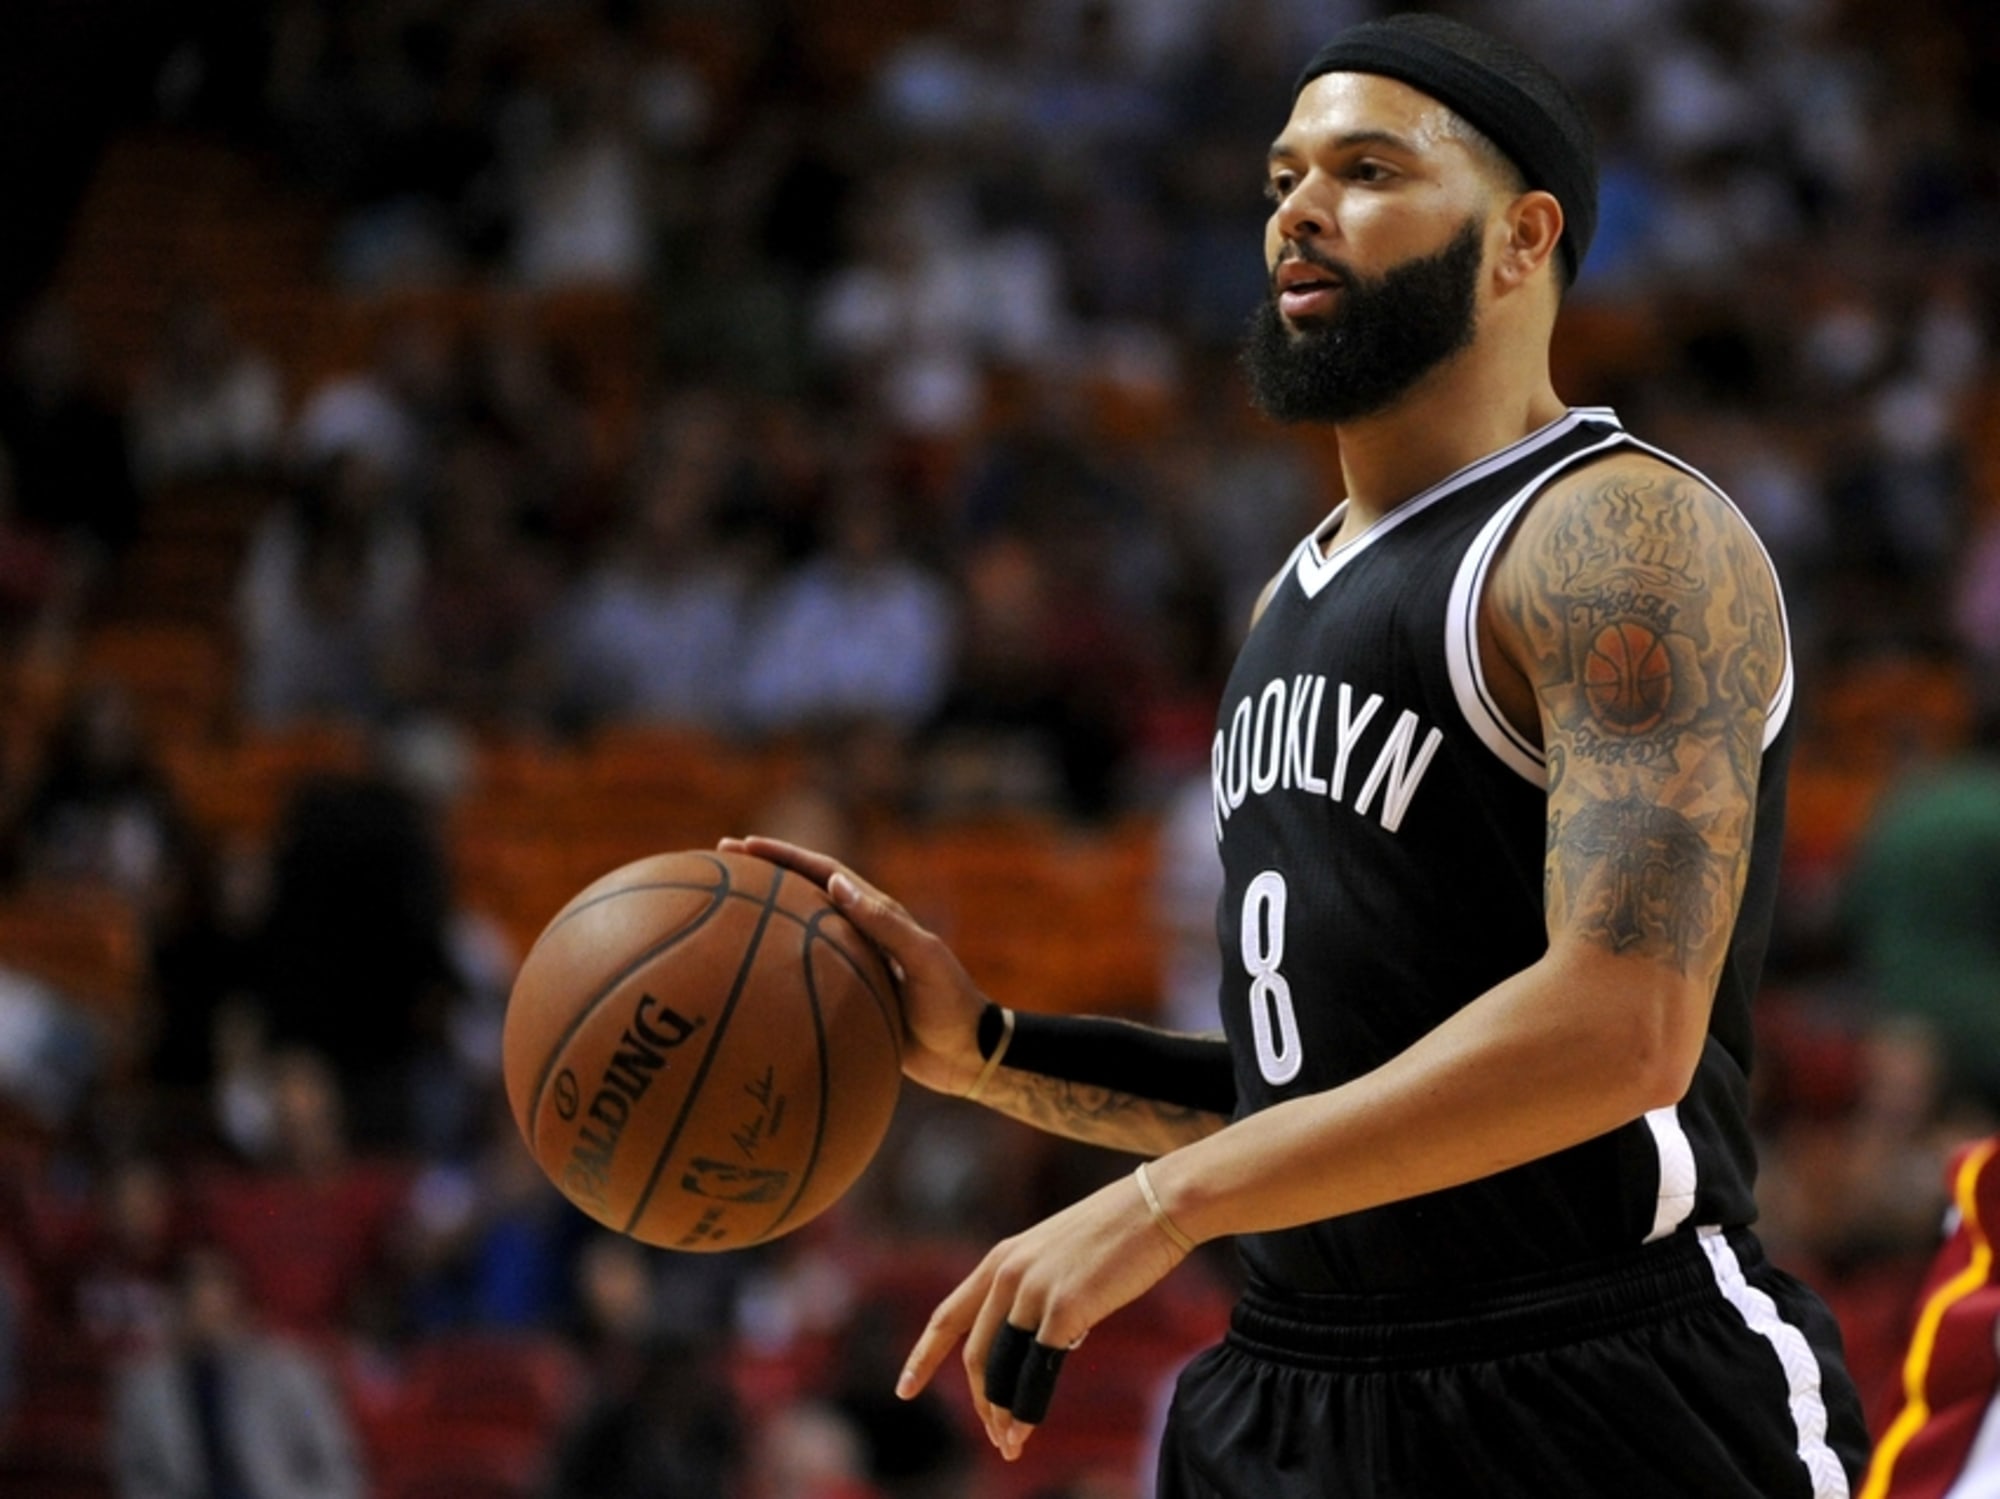 New Jersey Nets Make a Deal for Utah's Deron Williams